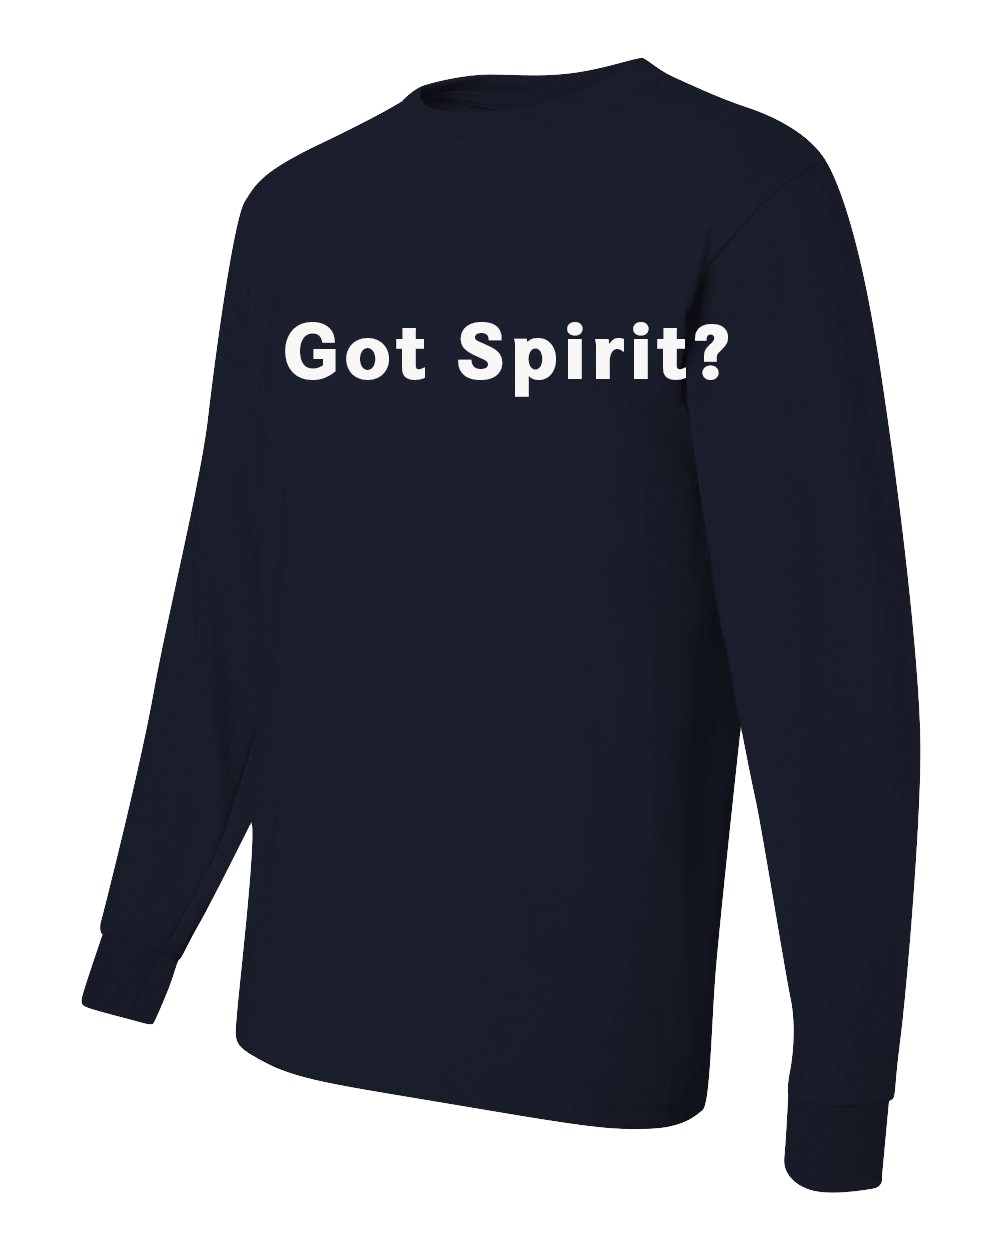 STAFF Resurrection L/S "Got Spirit" T-Shirt w/ Logo - Please Allow 2-3 Weeks for Delivery